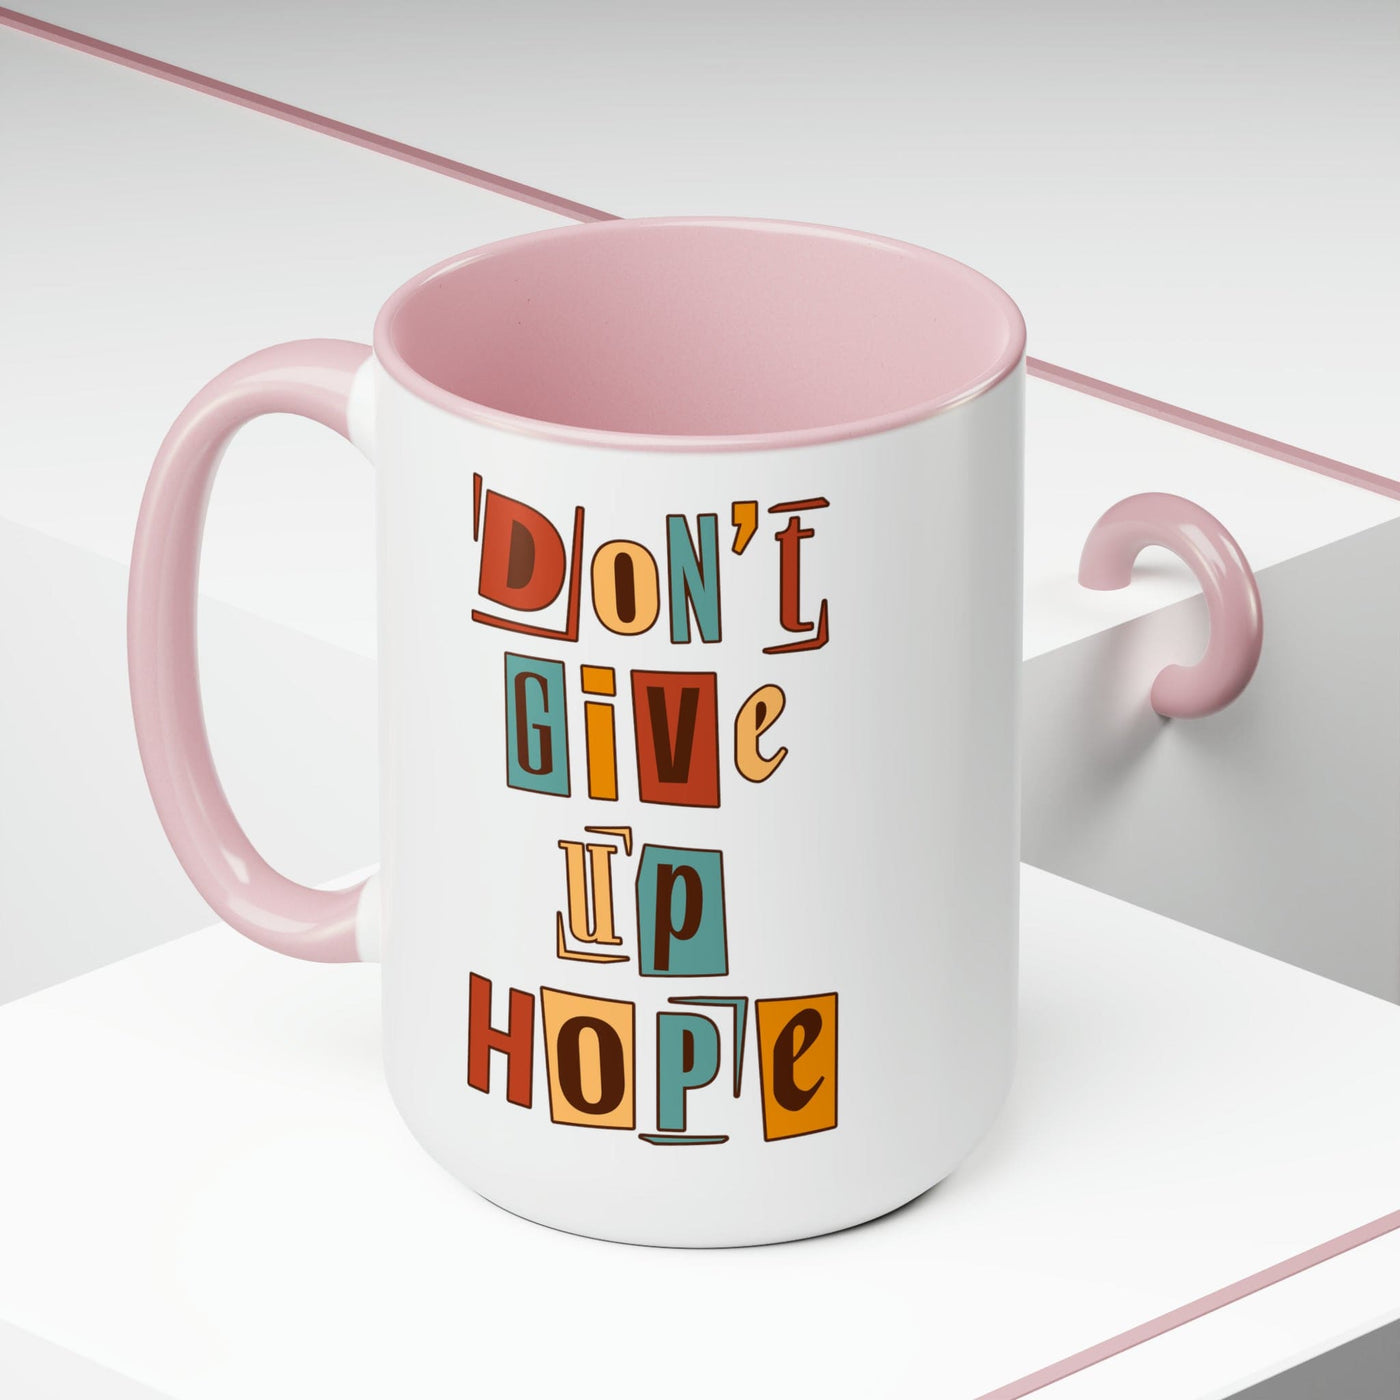 Accent Ceramic Coffee Mug 15oz - Say It Soul - Don’t Give Up Hope Inspiration -